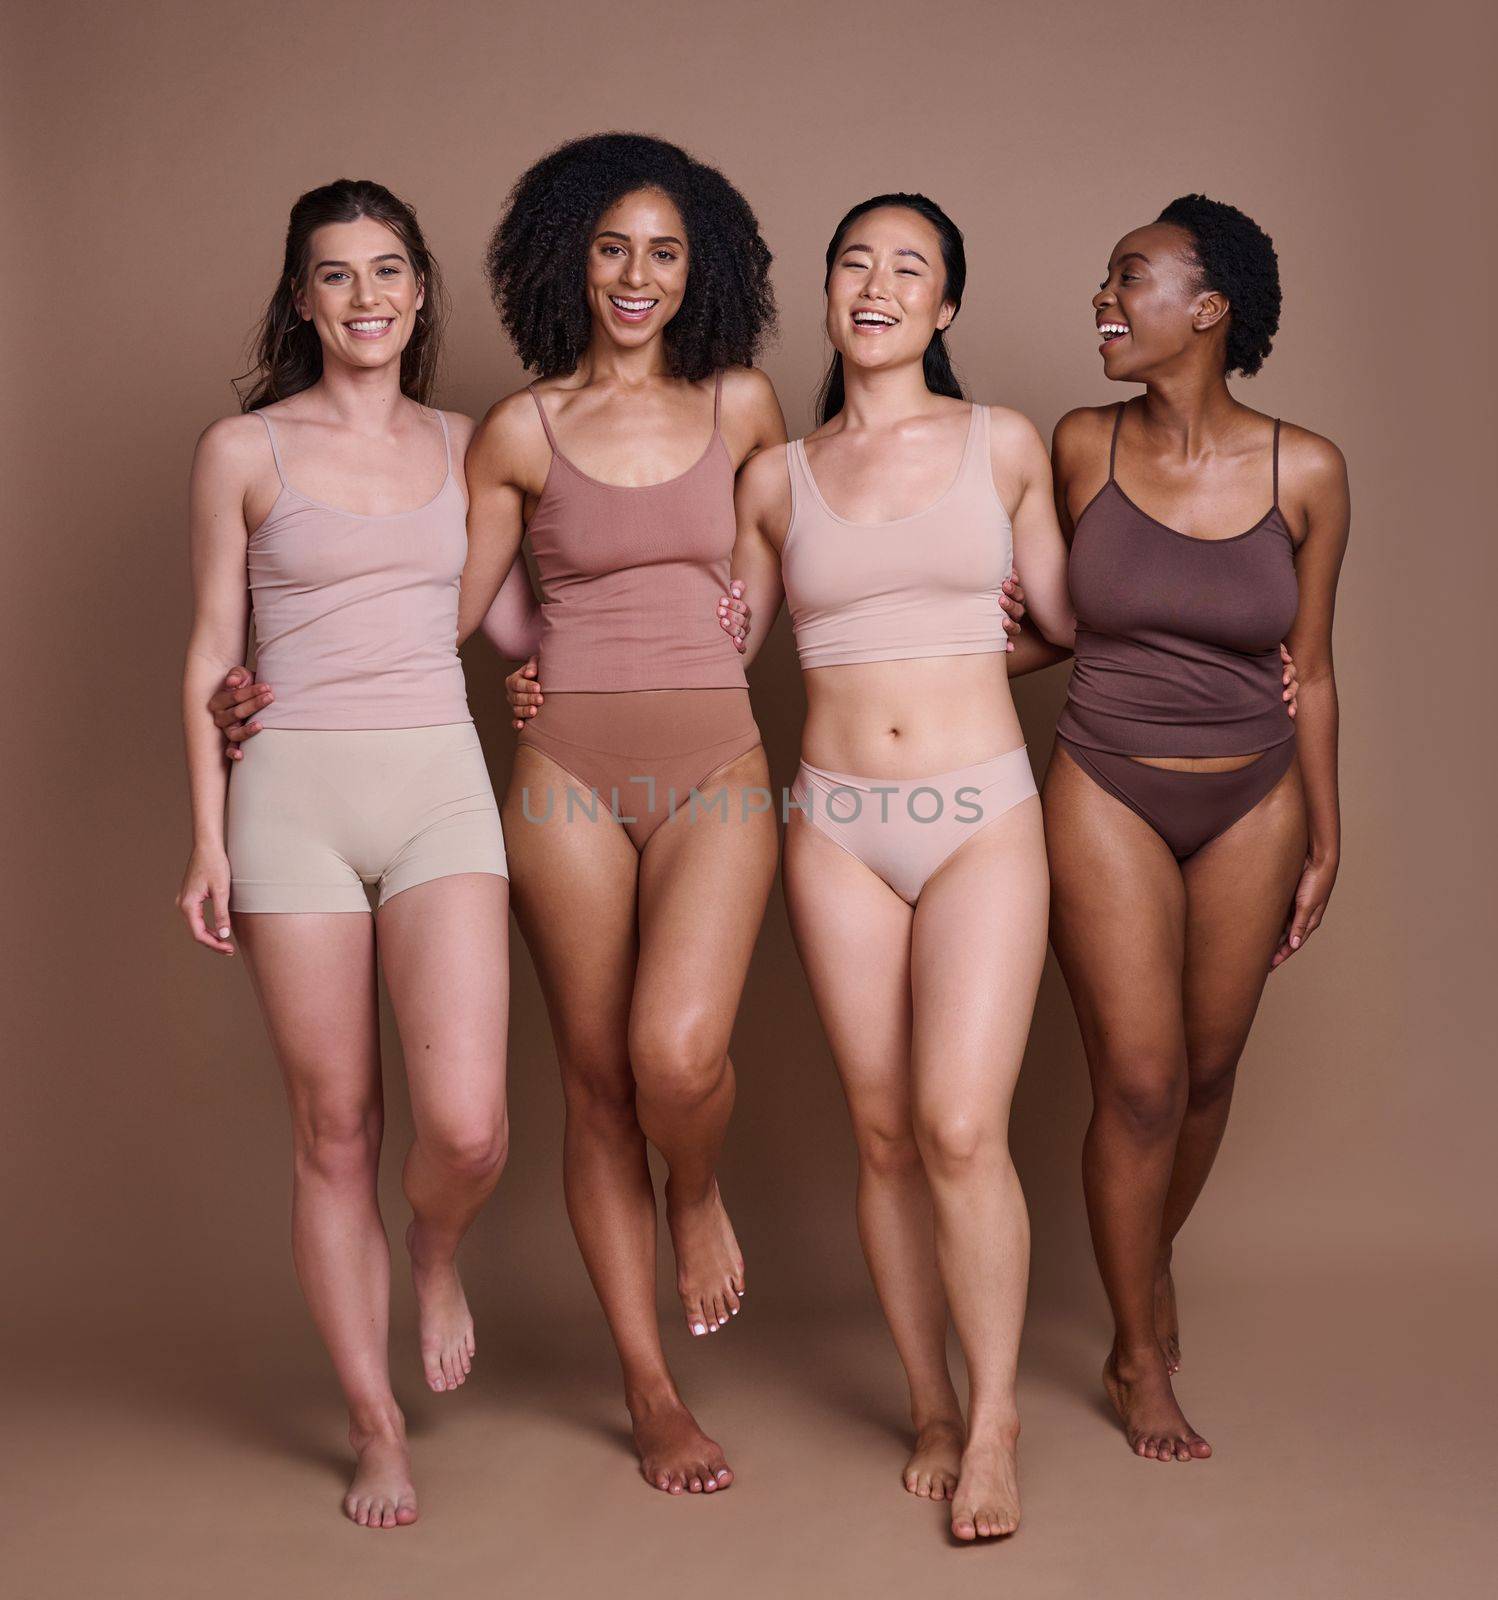 Diversity, woman and happy portrait in underwear for body motivation, beauty support and friendship collaboration. Interracial models, luxury skincare wellness and body positive happiness in studio.